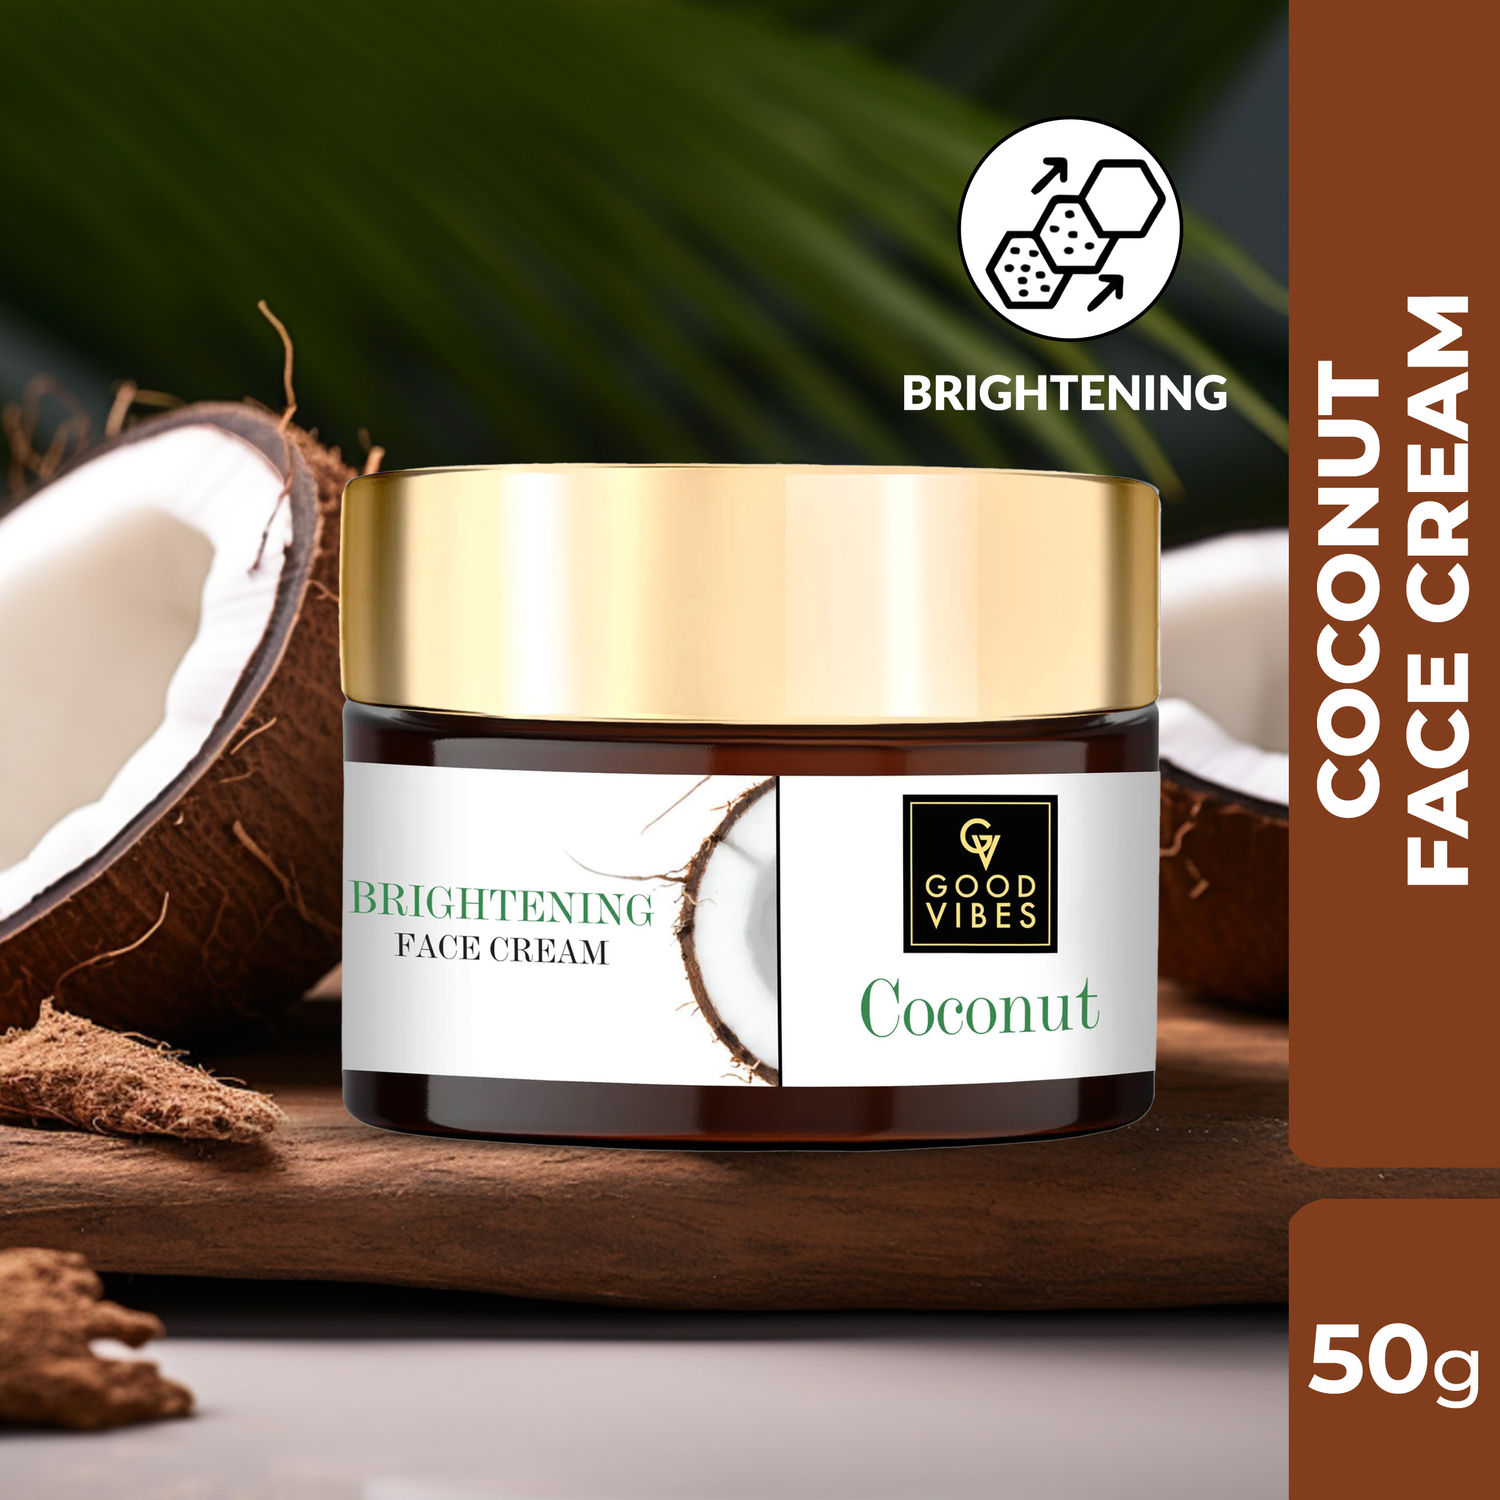 Buy Good Vibes Coconut Brightening Face Cream | Moisturizing, Provides Glow | No Parabens, No Sulphates, No Mineral Oil, No Animal Testing (50 g) - Purplle